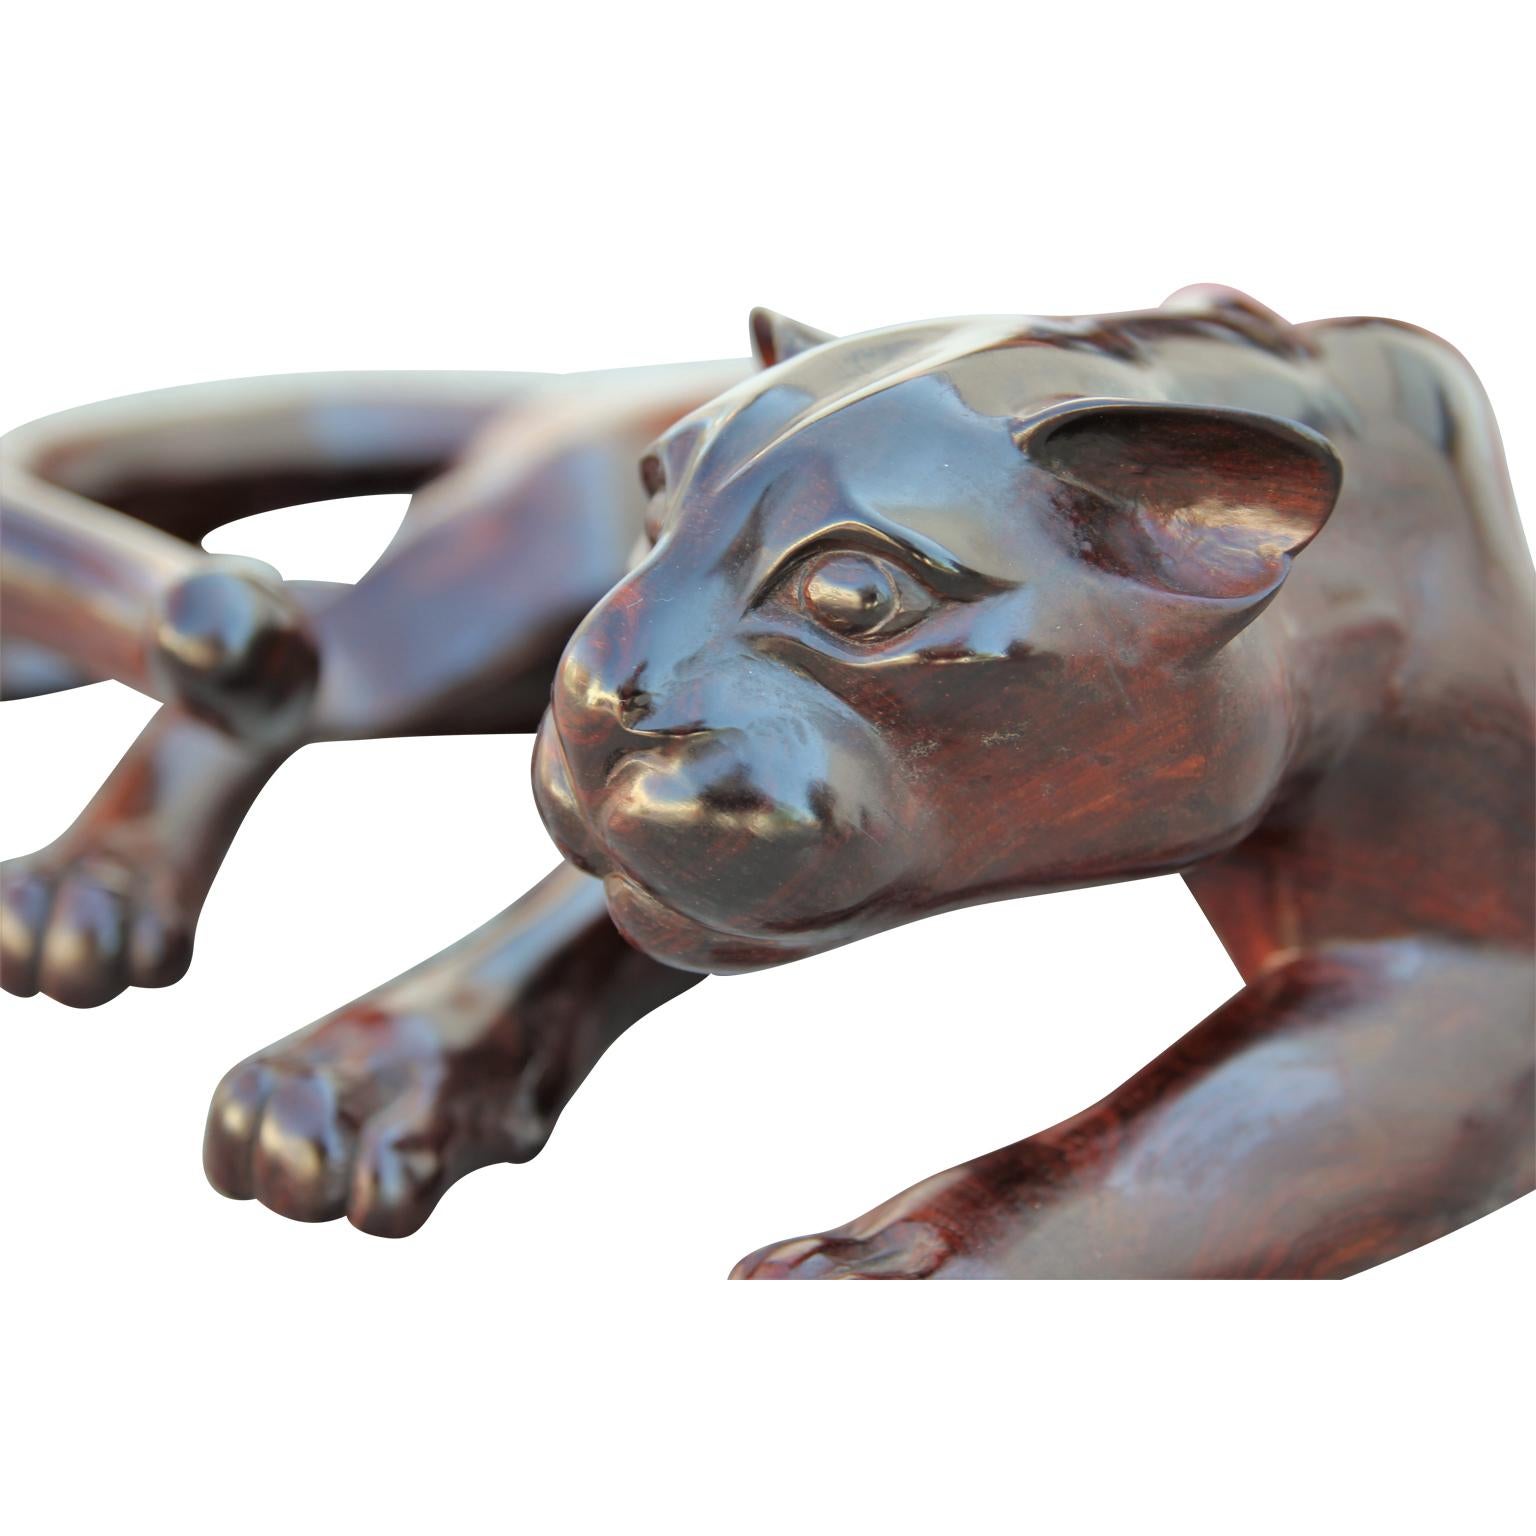 Panamanian Wounaan Embera Cocobolo Wooden Cougar / Panther Sculpture by Eliciano Membache